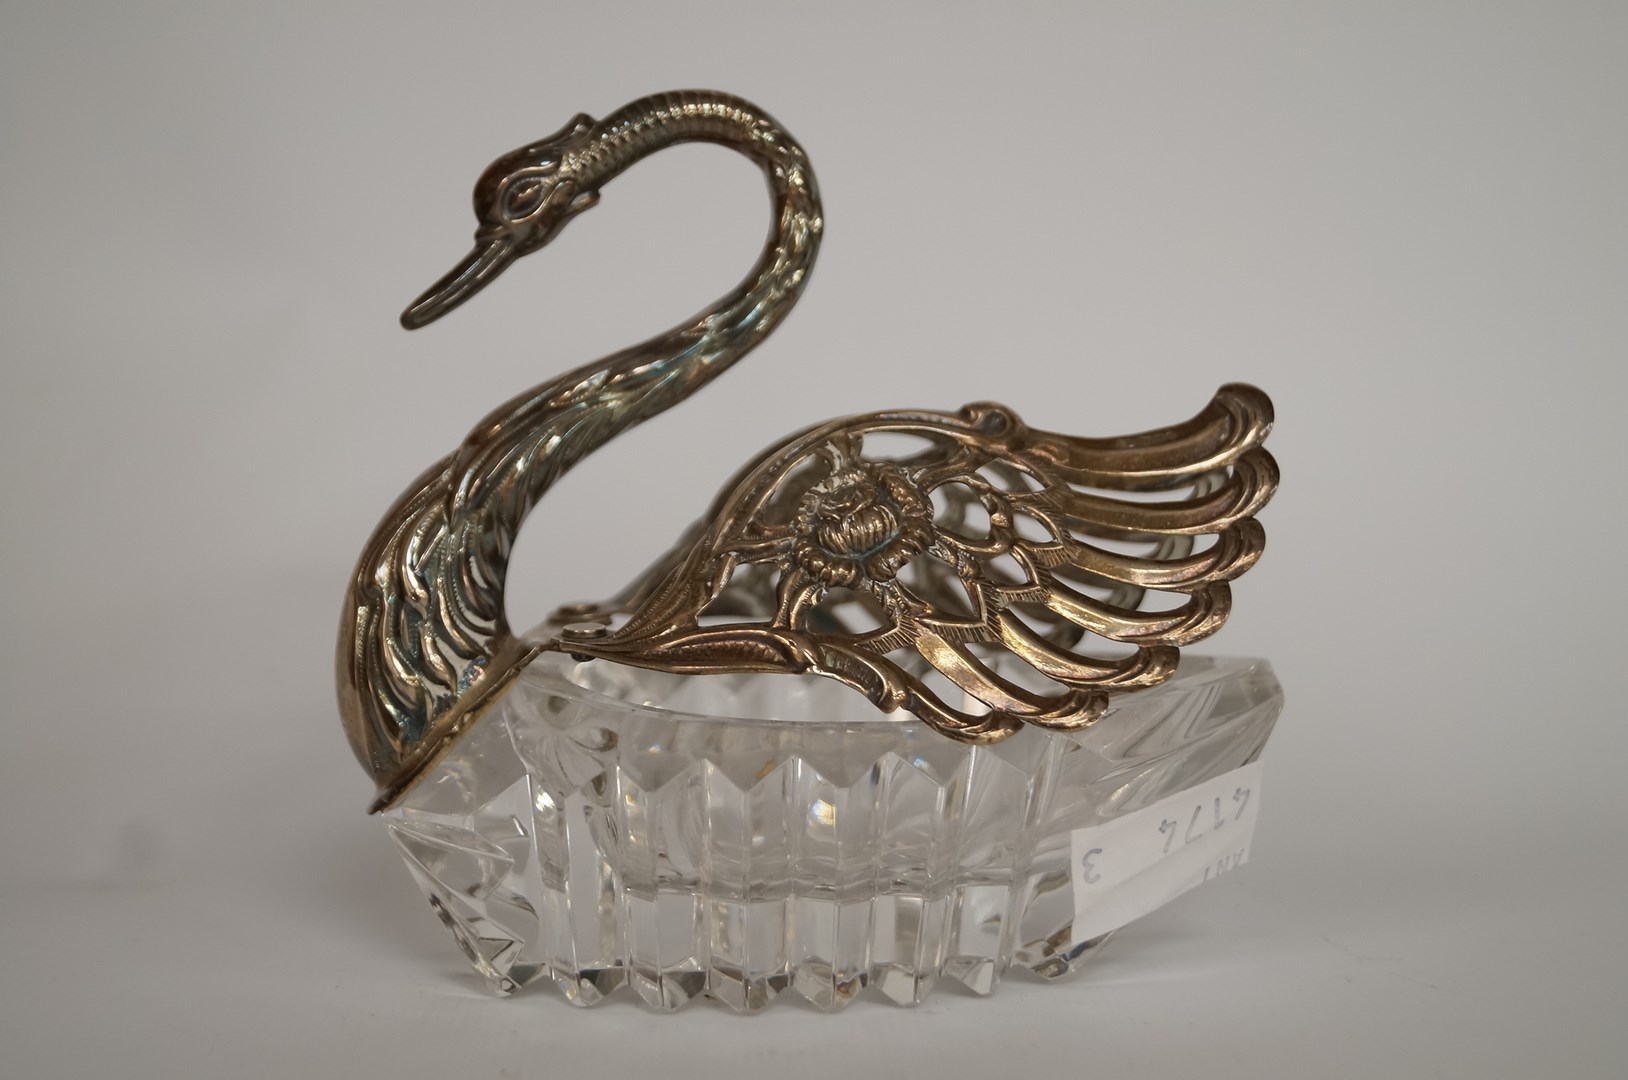 A silver and glass swan bon-bon dish, London import mark for 1975, glass body, hinged silver wings